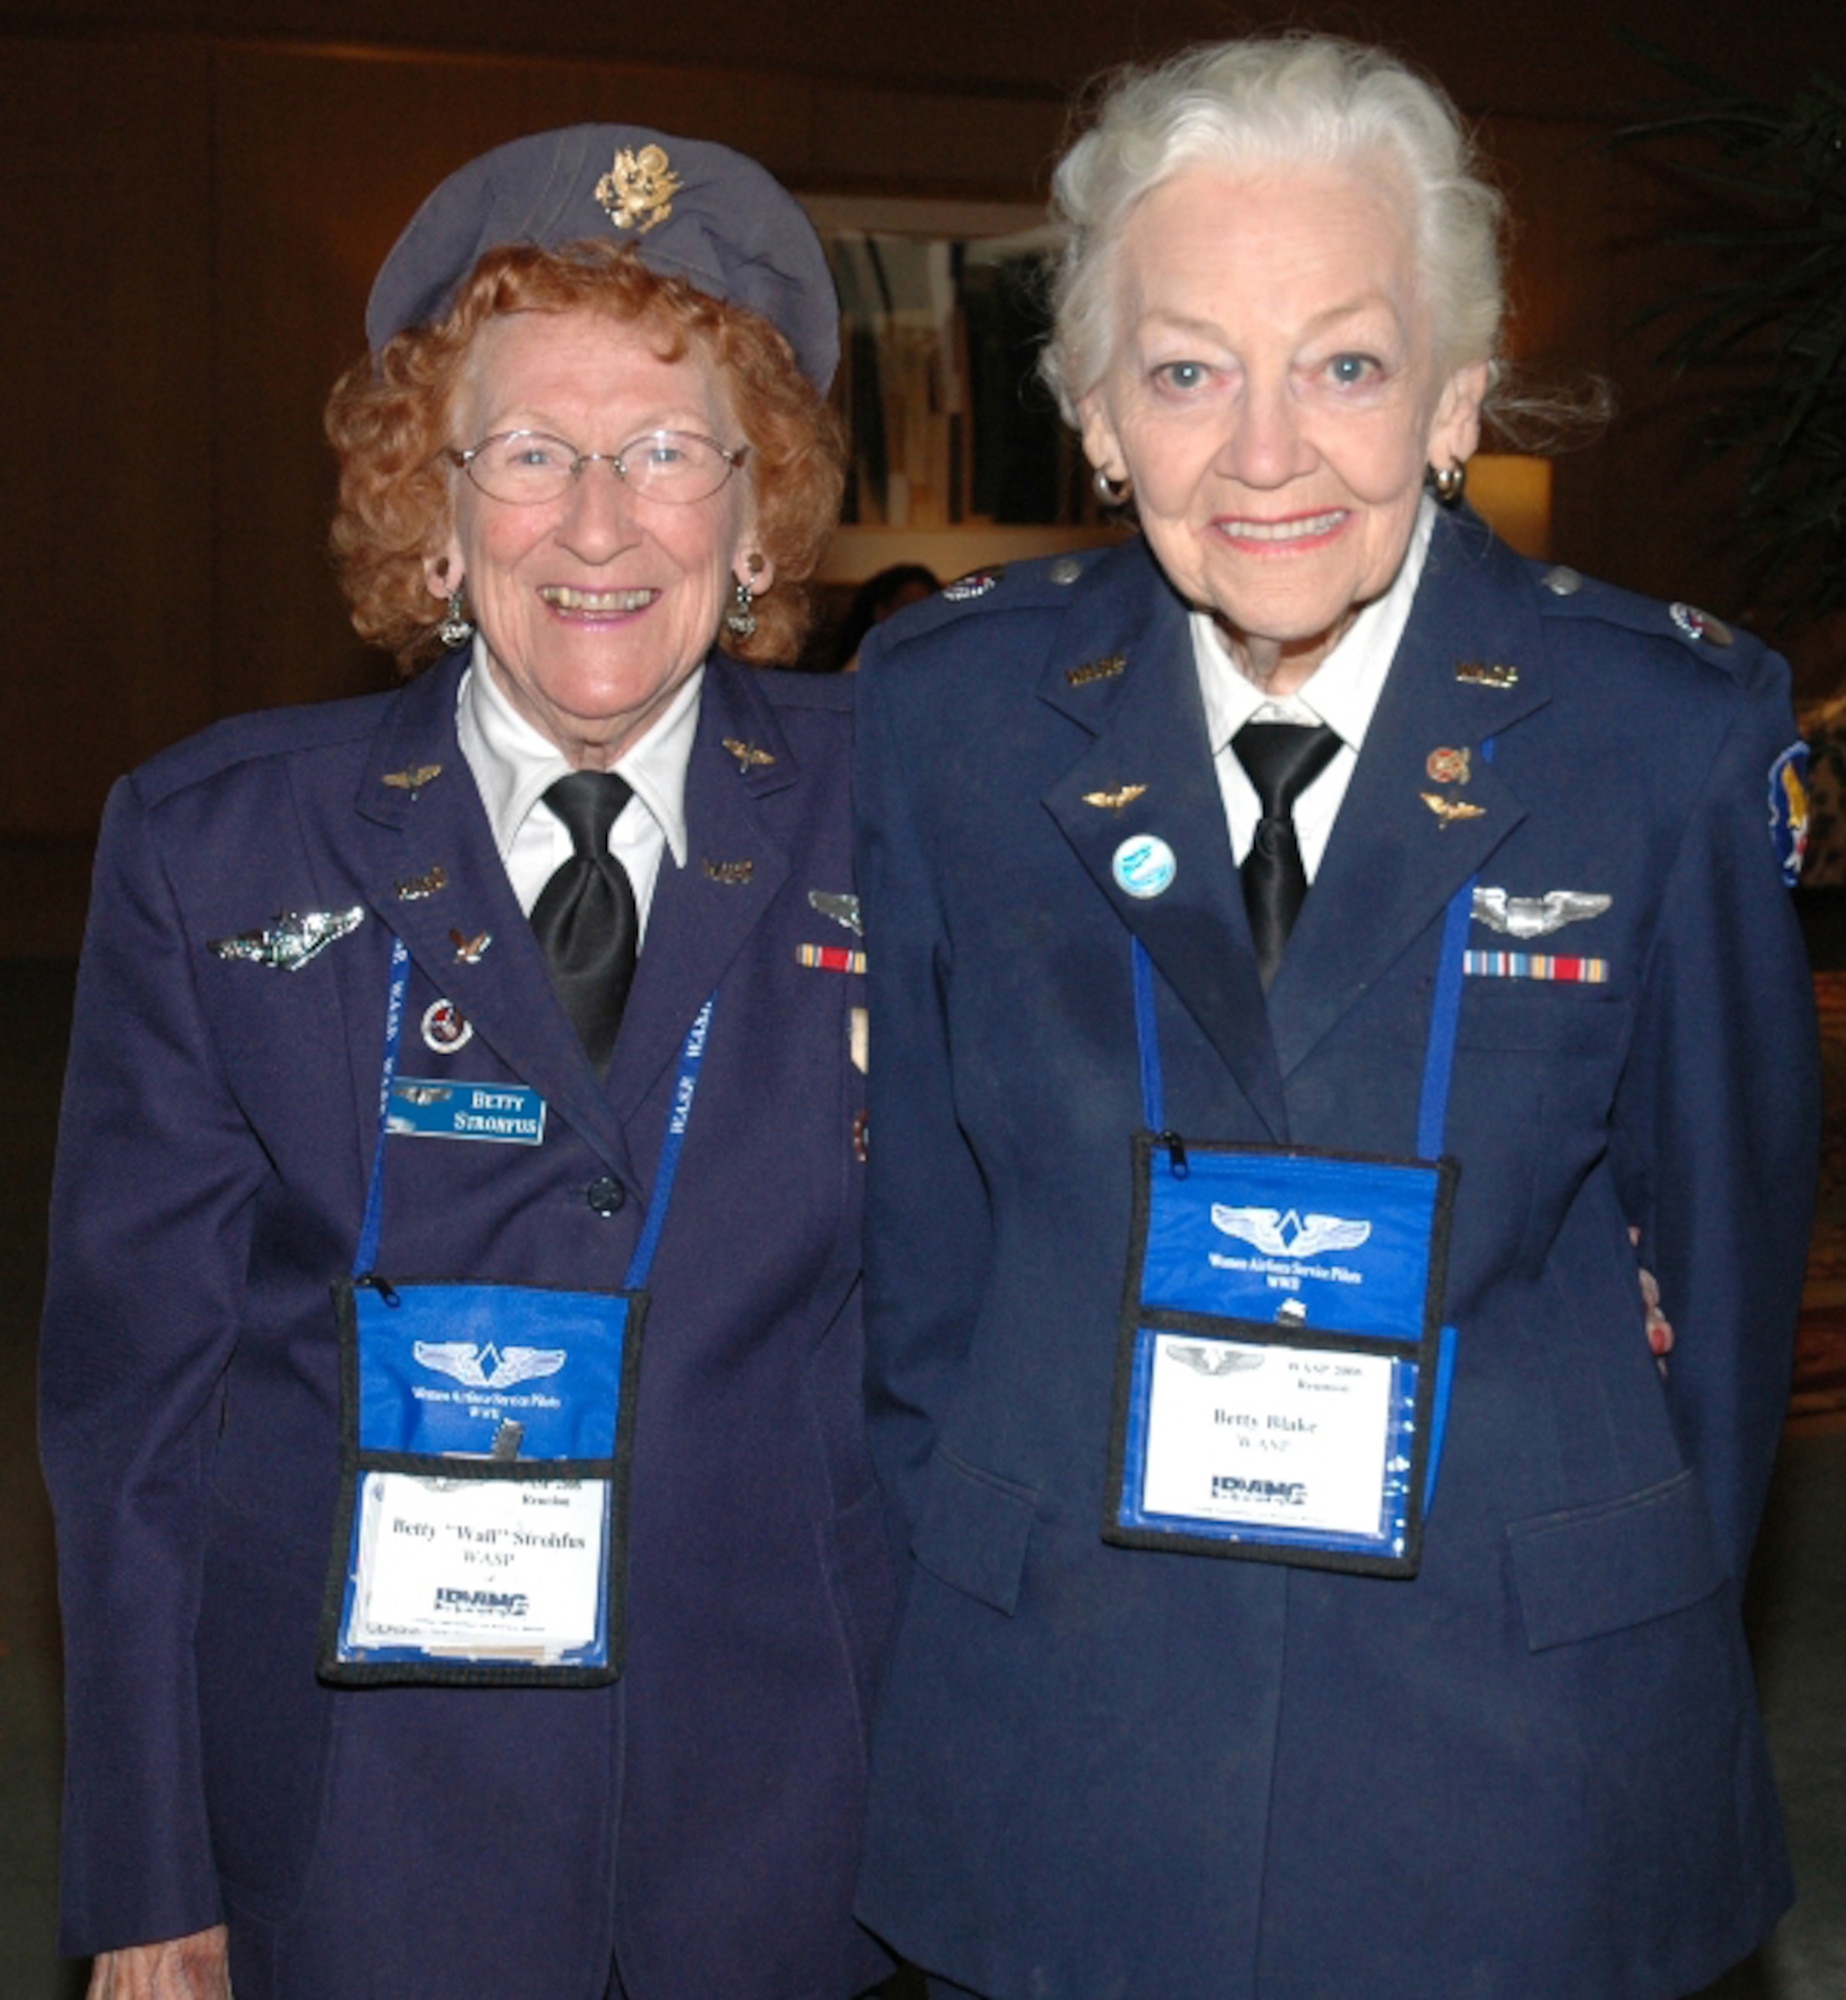 Former WASP members, Betty Strohfus and Betty Blake pose for a photograph prior to a dinner in their honor. (U.S. Air Force Photo by Staff Sgt. Jay Ponder